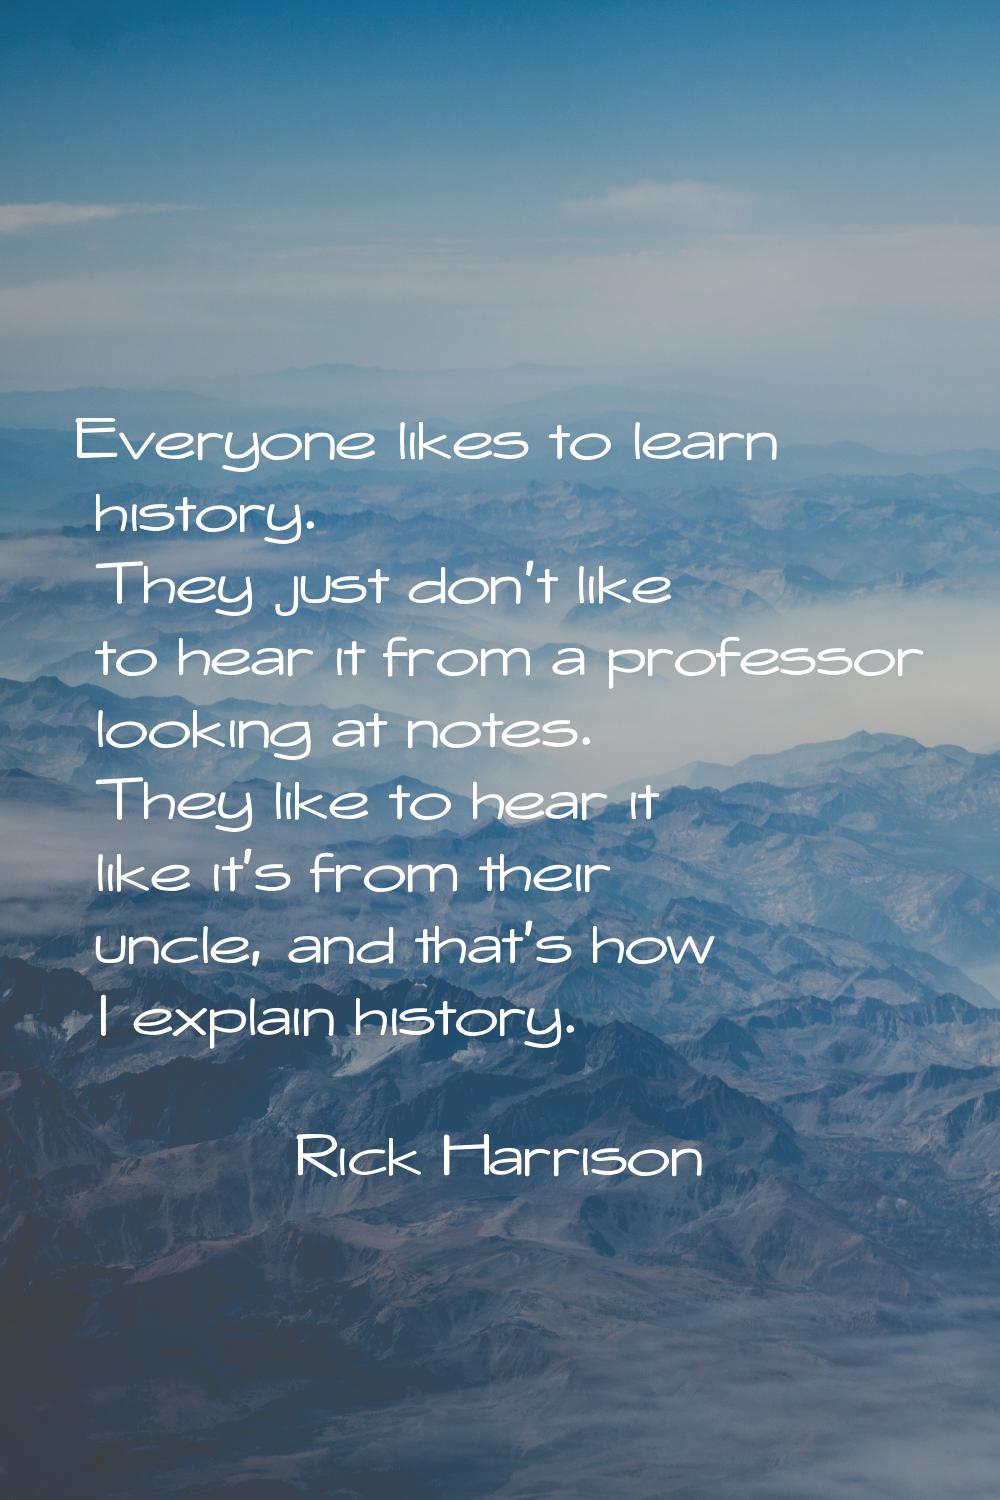 Everyone likes to learn history. They just don't like to hear it from a professor looking at notes.